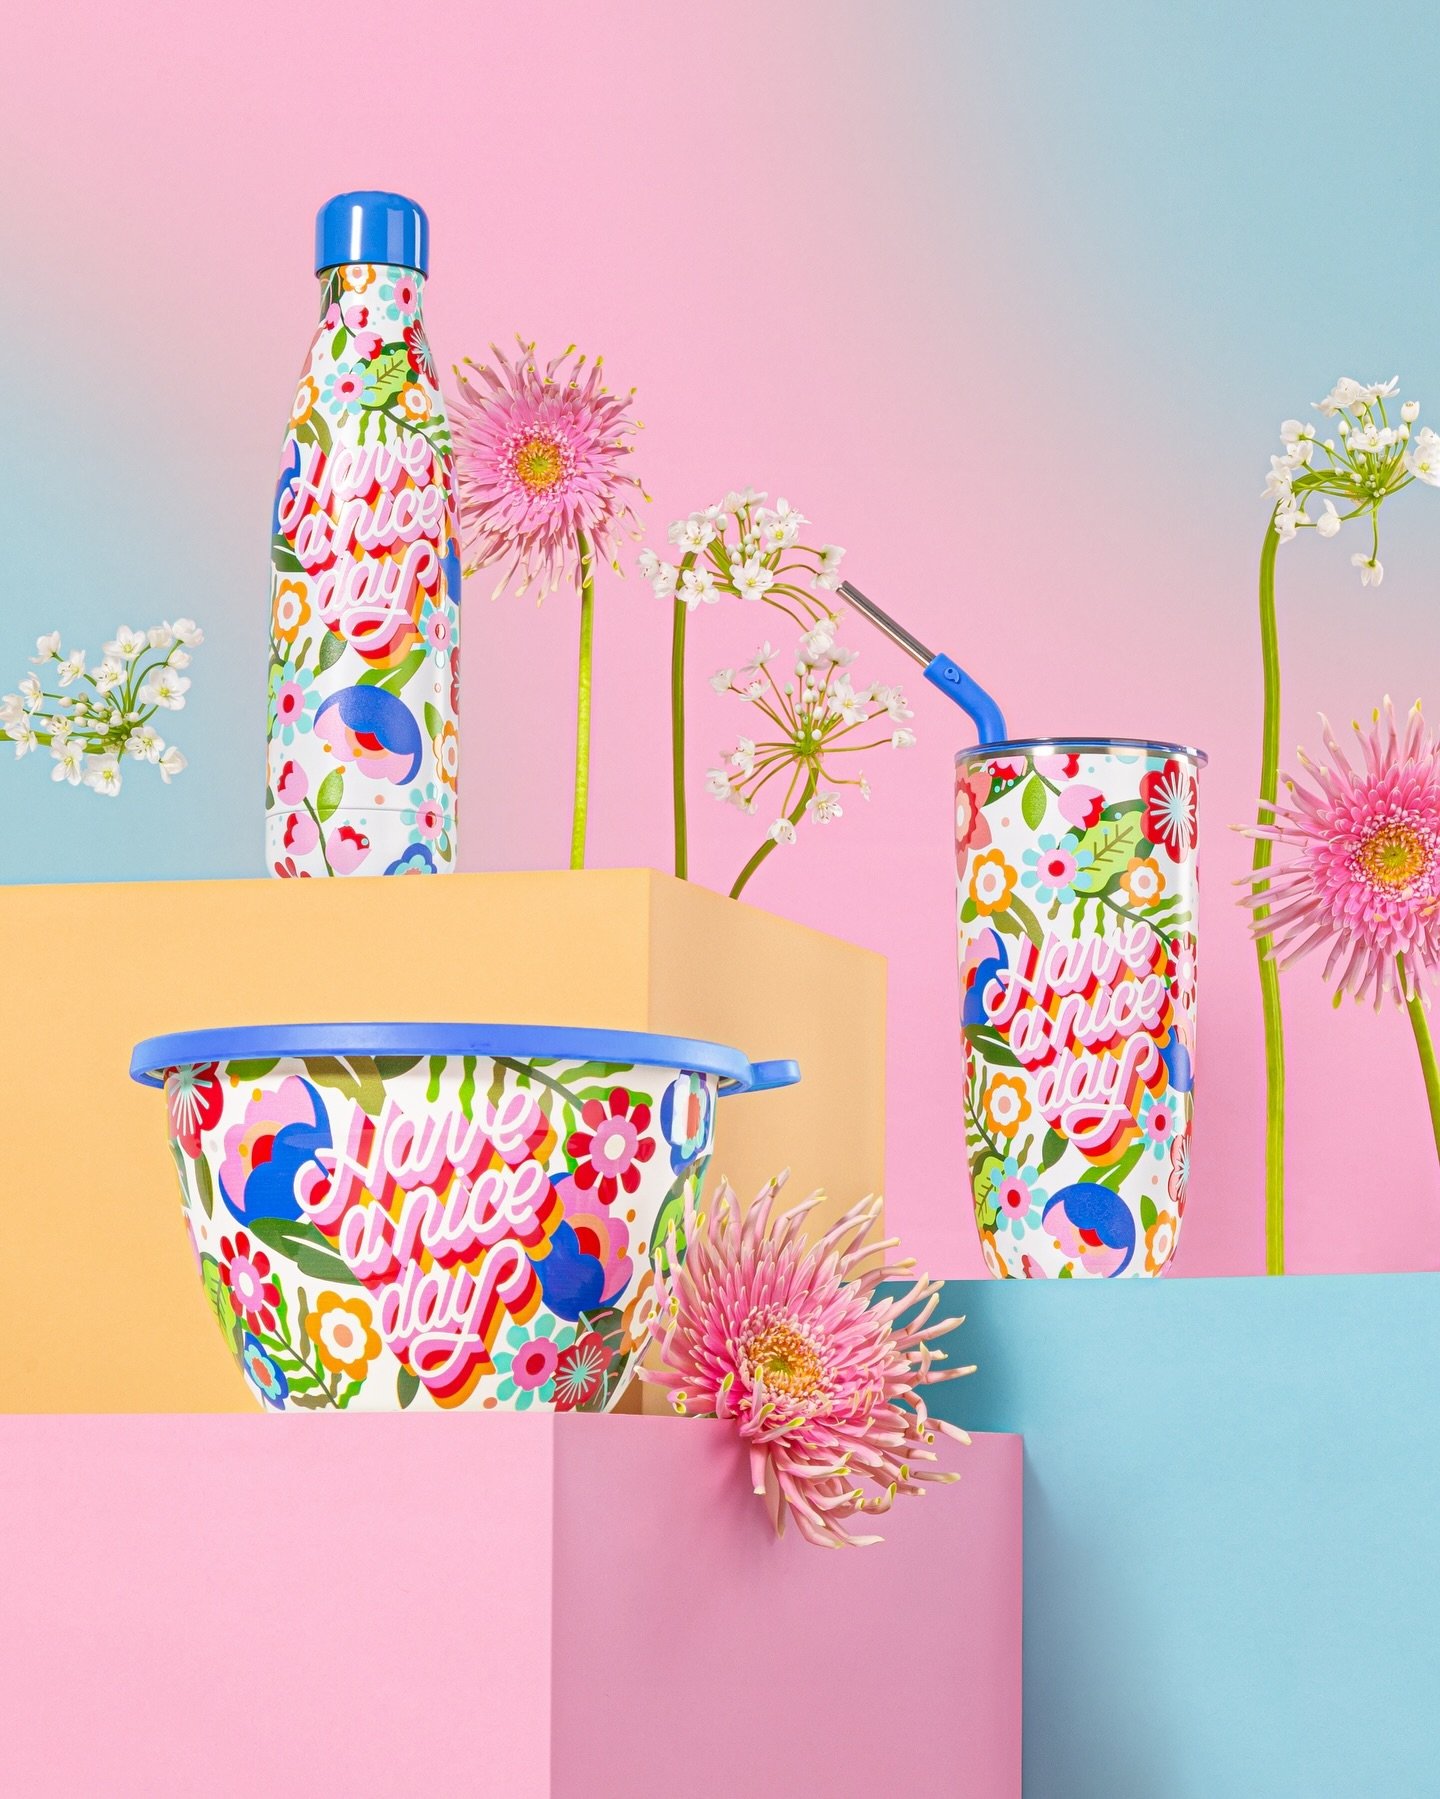 Soft &amp; Springy shot for @swellbottle x @haveanicedayy_ collab 🌼🌷🌸

.
.
.
.
#productphotography #stilllife #commercialphotography #studiophotography #spring #colorfulphotography, photo studio, creative content agency, advertising photography, s